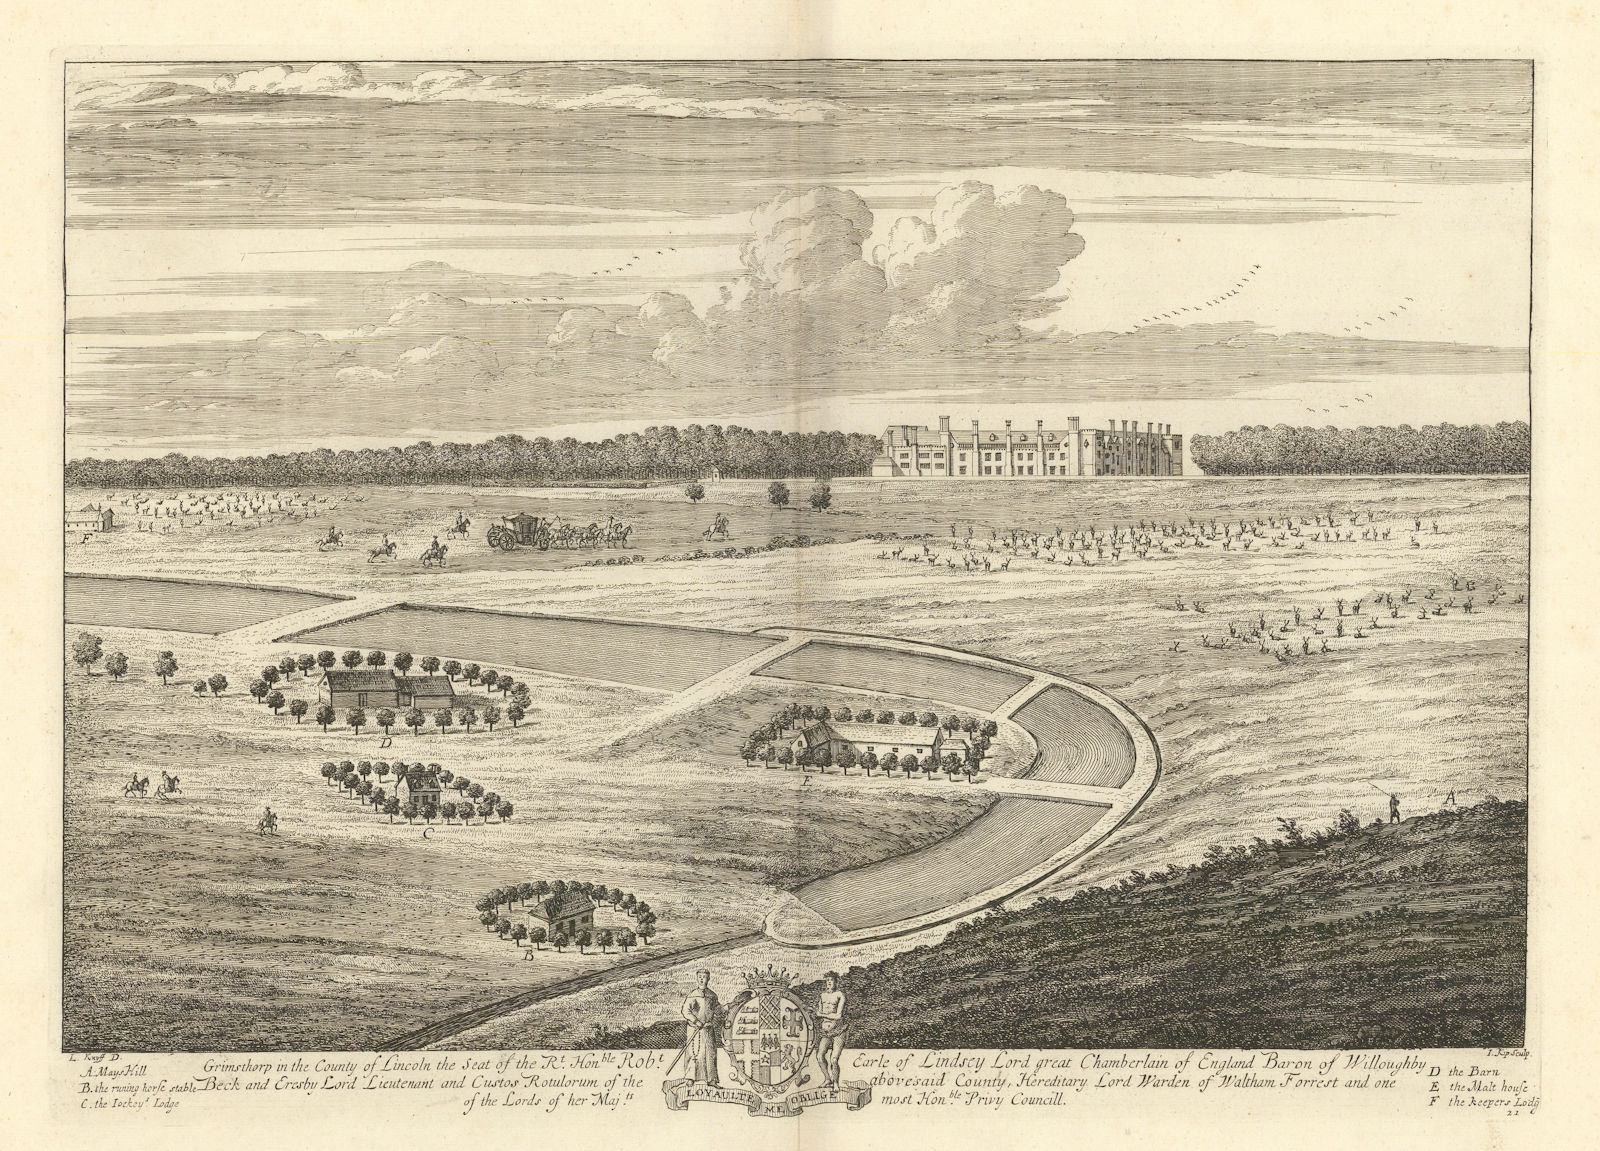 Associate Product Grimsthorpe Castle by Kip/Knyff Pl.21 "Grimsthorp in the County of Lincoln" 1709